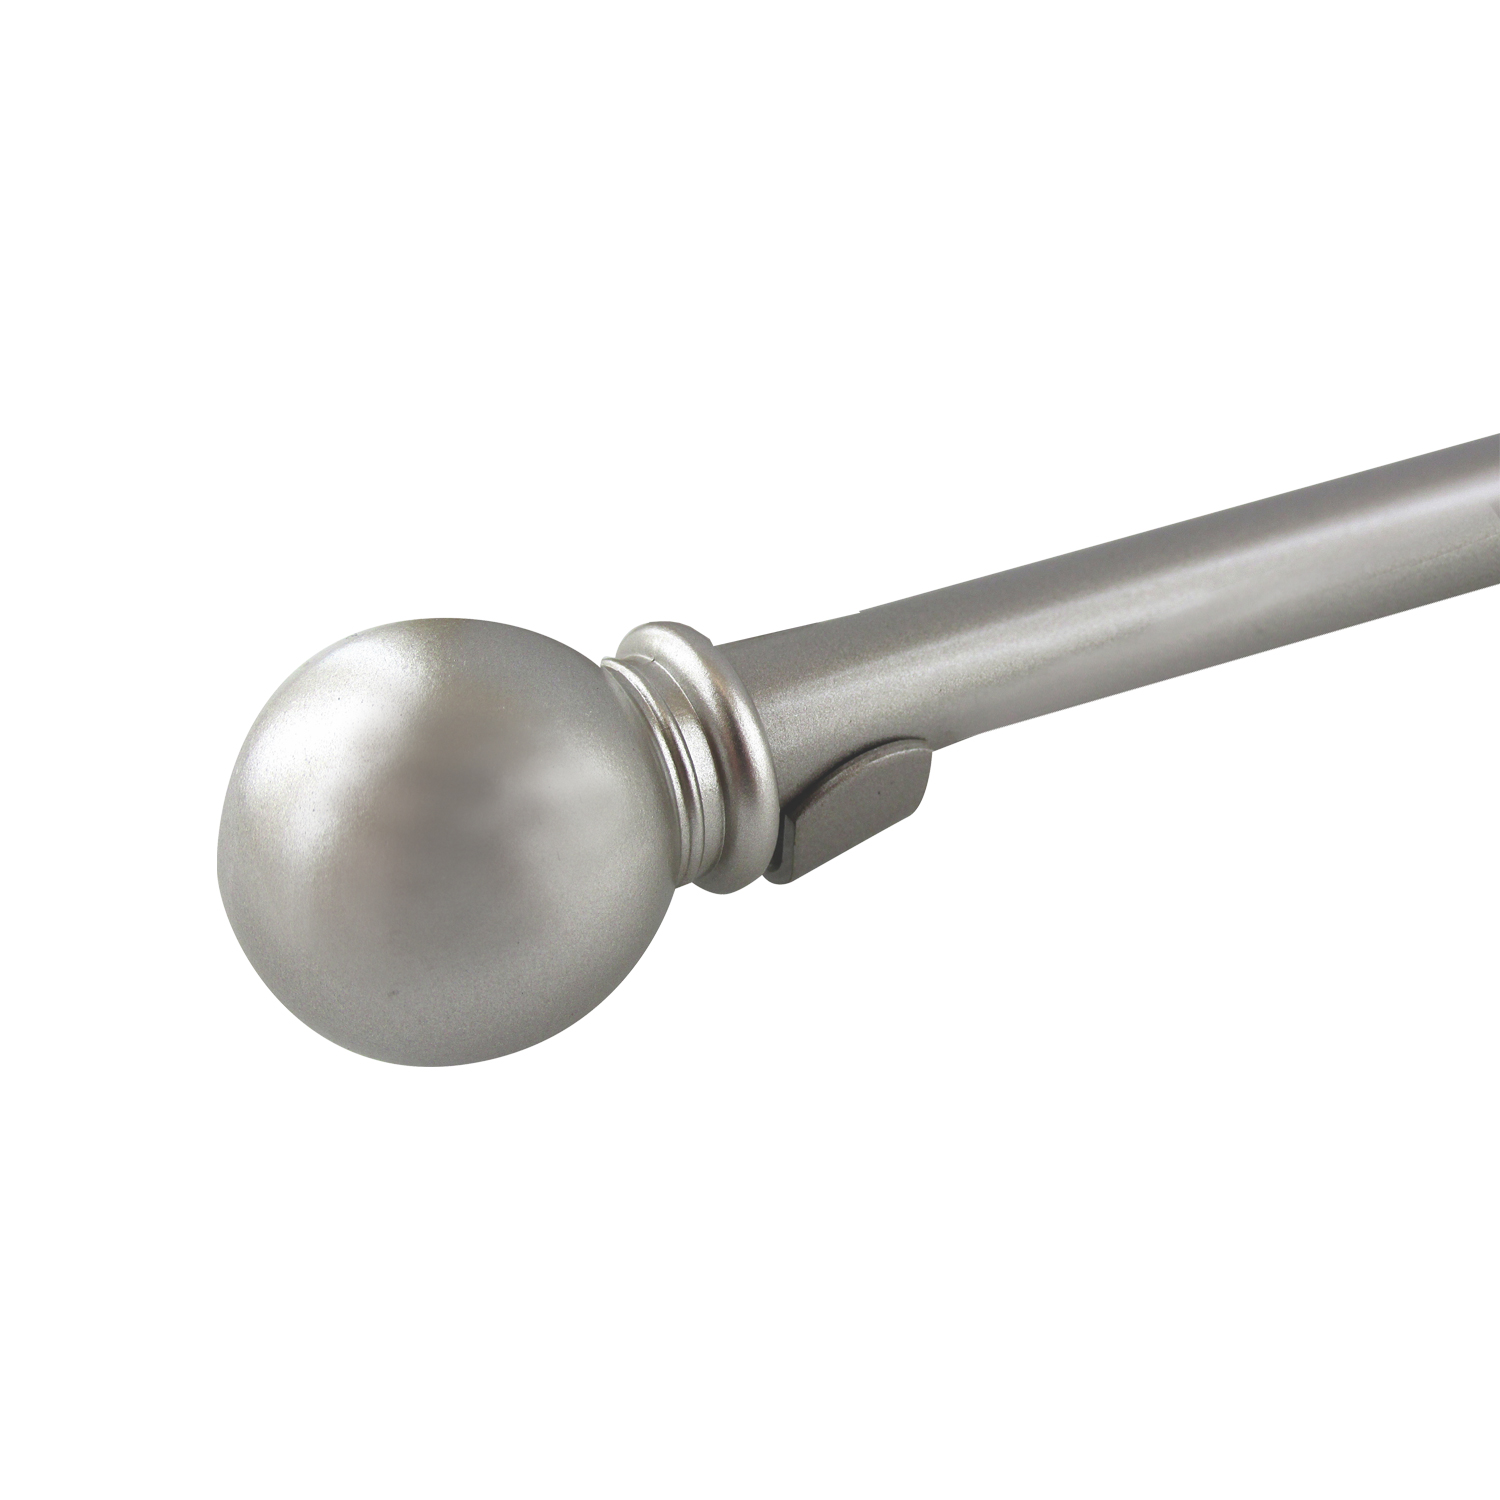 Henlé Pro - Round café rod 28-48 in., 5/8 in. diam., brushed silver